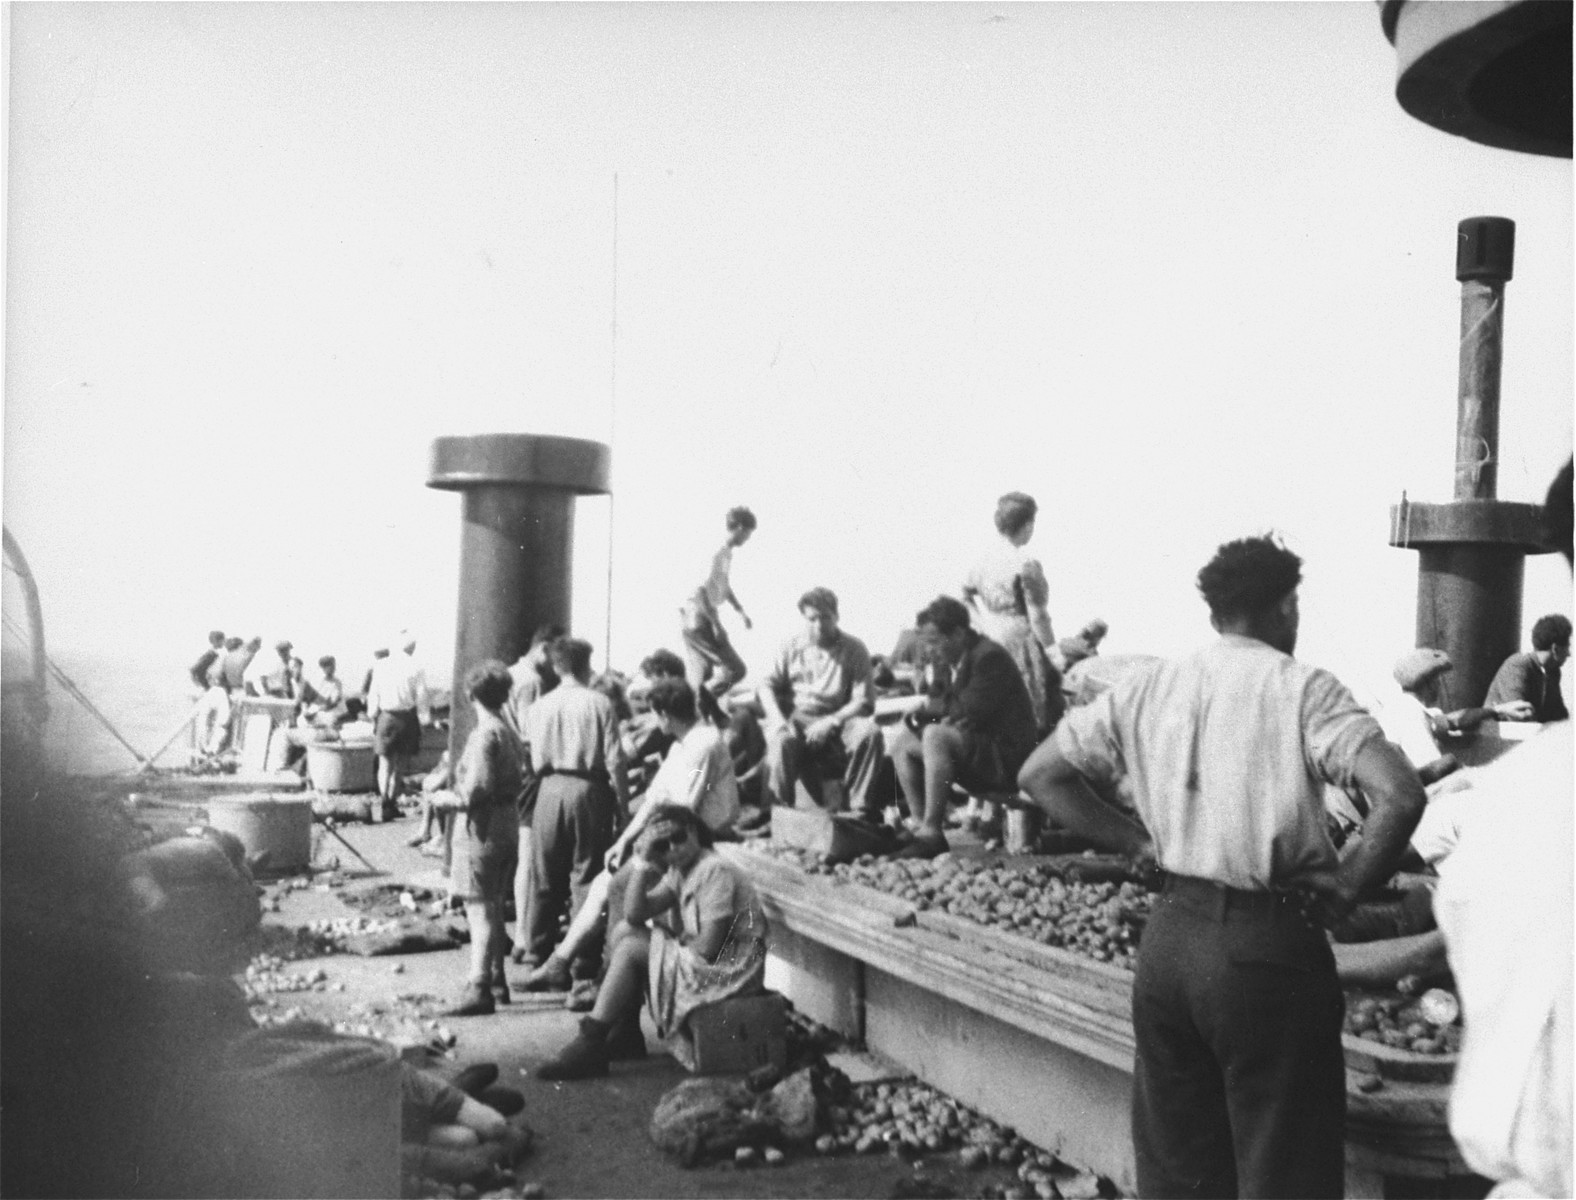 Jewish passengers rest on the deck of the Exodus 1947 amidst the debris from the previous night's struggle.